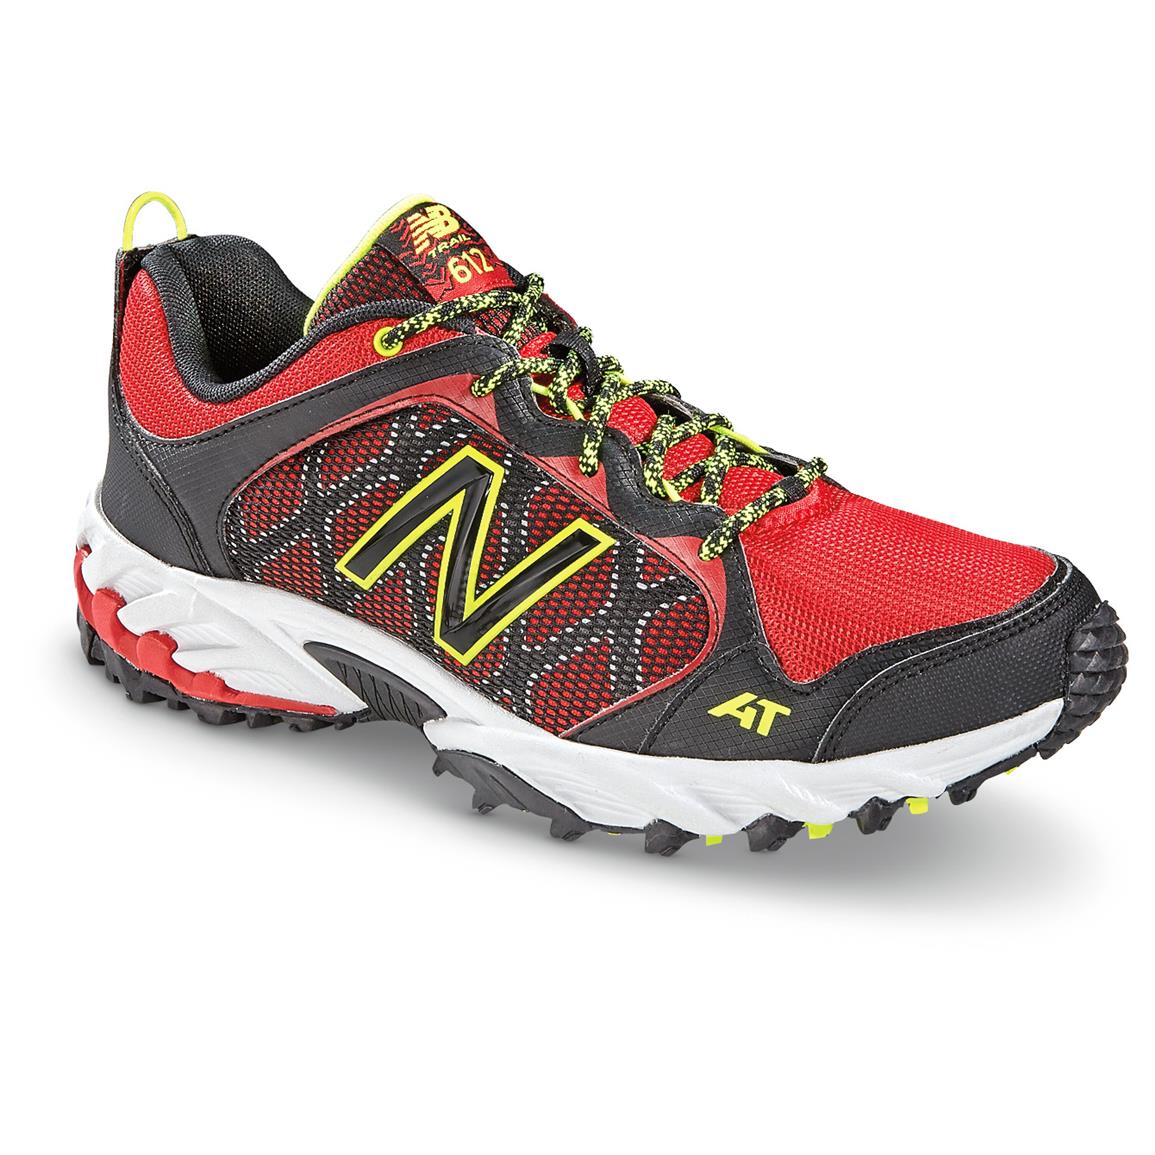 New Balance 612 Running Shoes - 652369, Running Shoes & Sneakers at ...